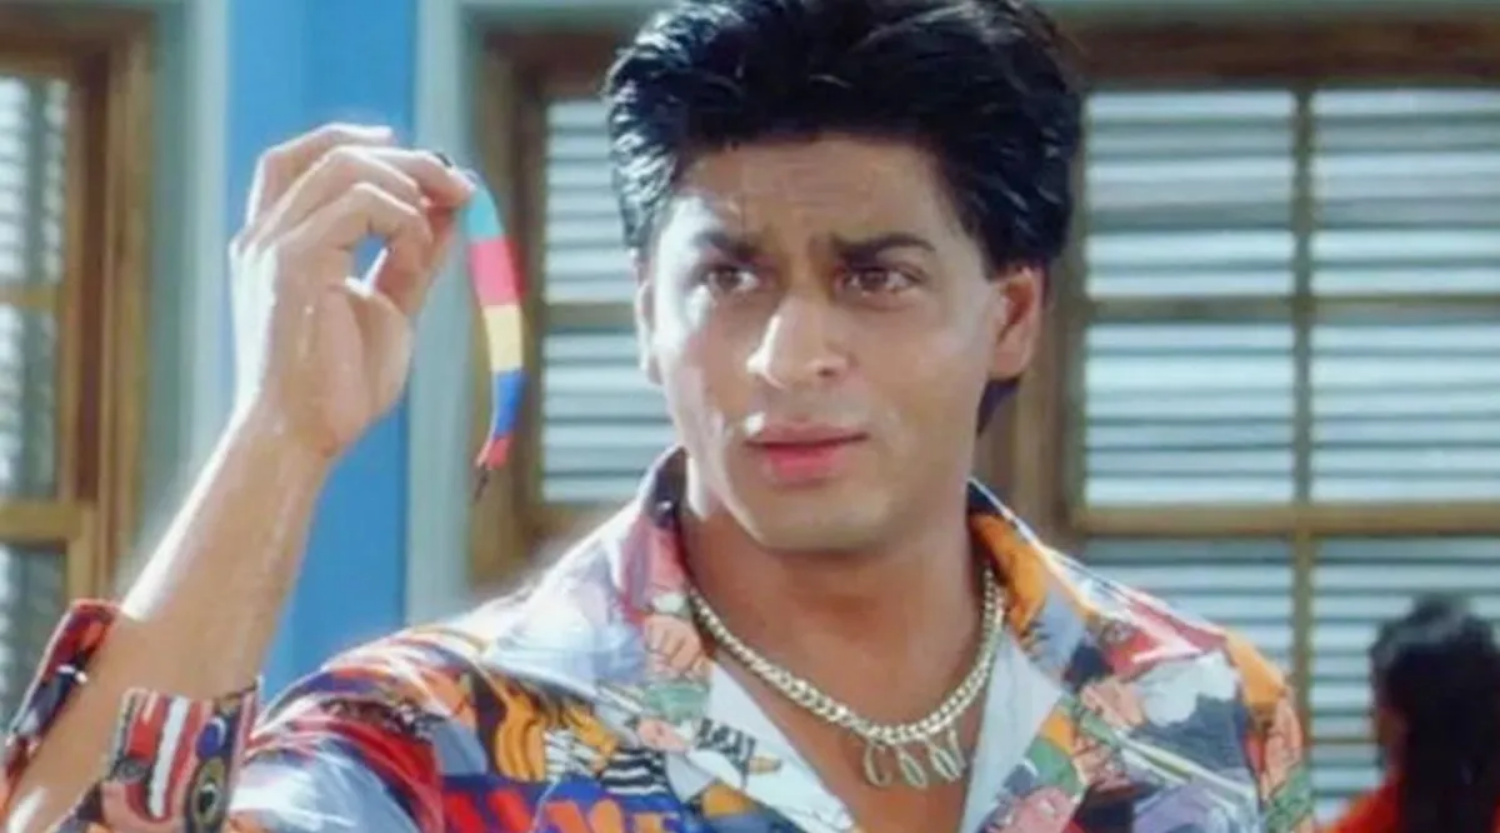 When Shah Rukh Khan said he’d never do a love story: ‘Cut to Kuch Kuch Hota Hai, I was 32 and playing a college student…’